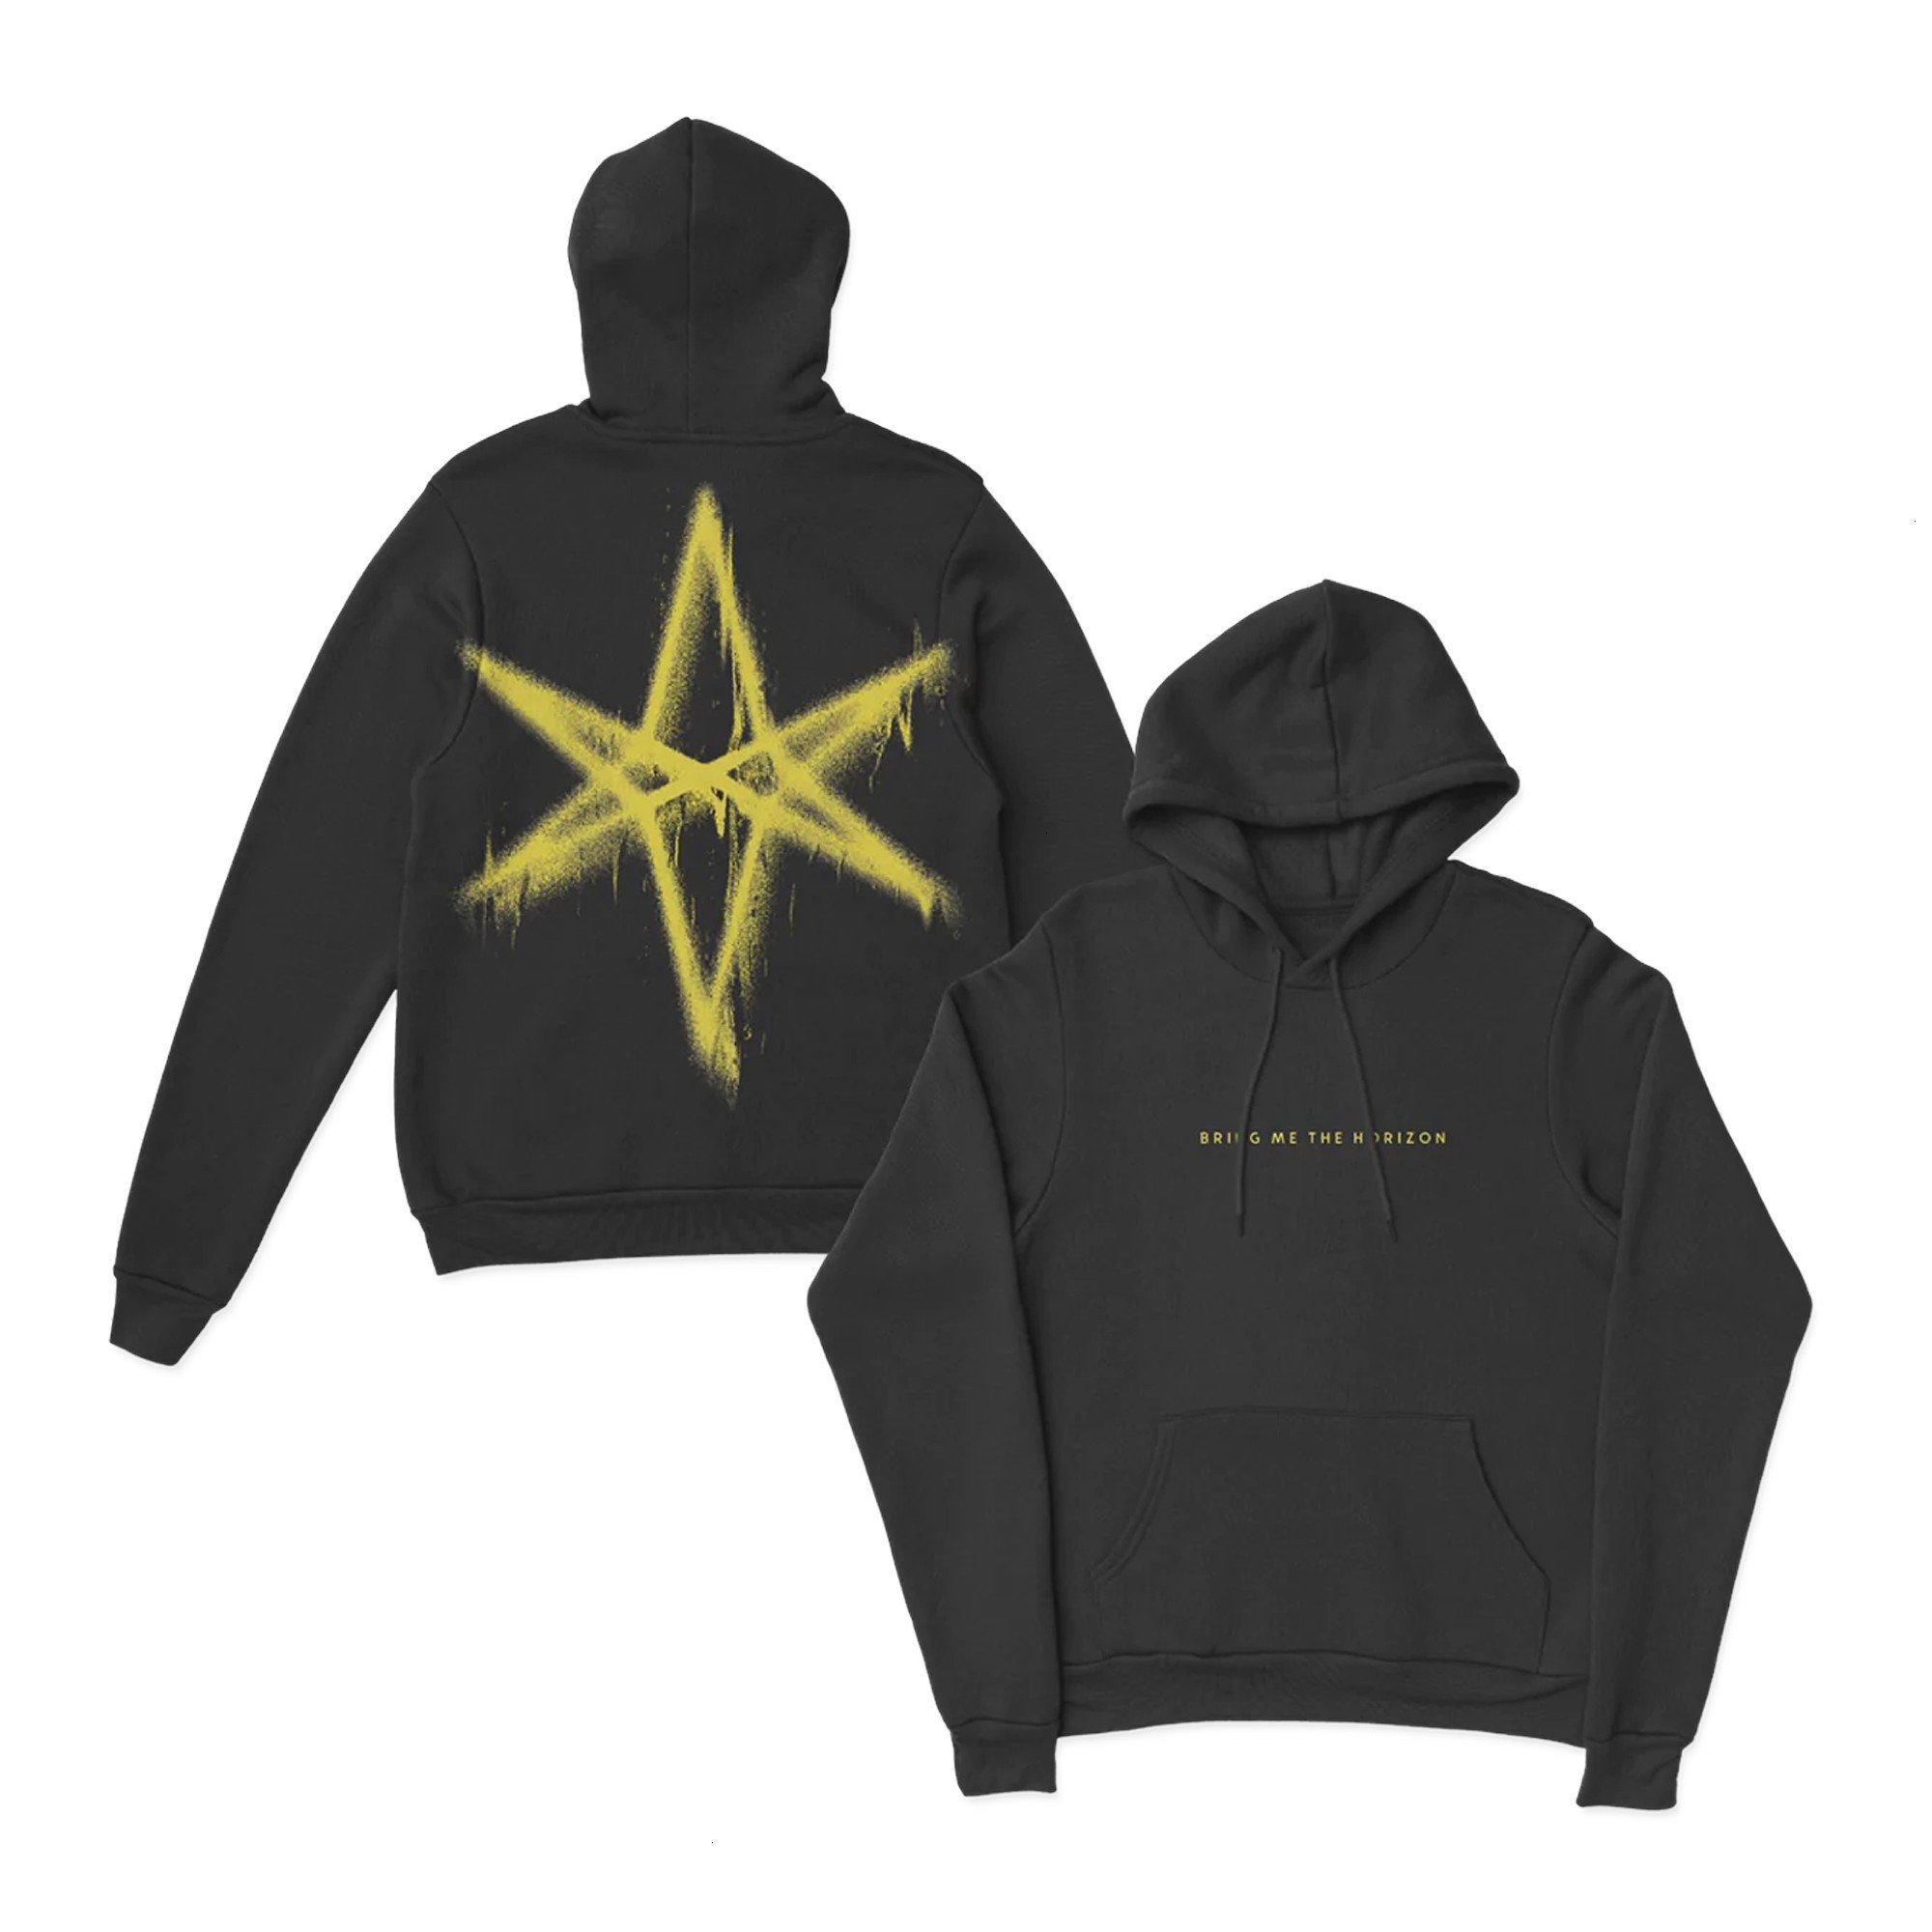 Bring Me the Horizon Album Double Sided Hoodie